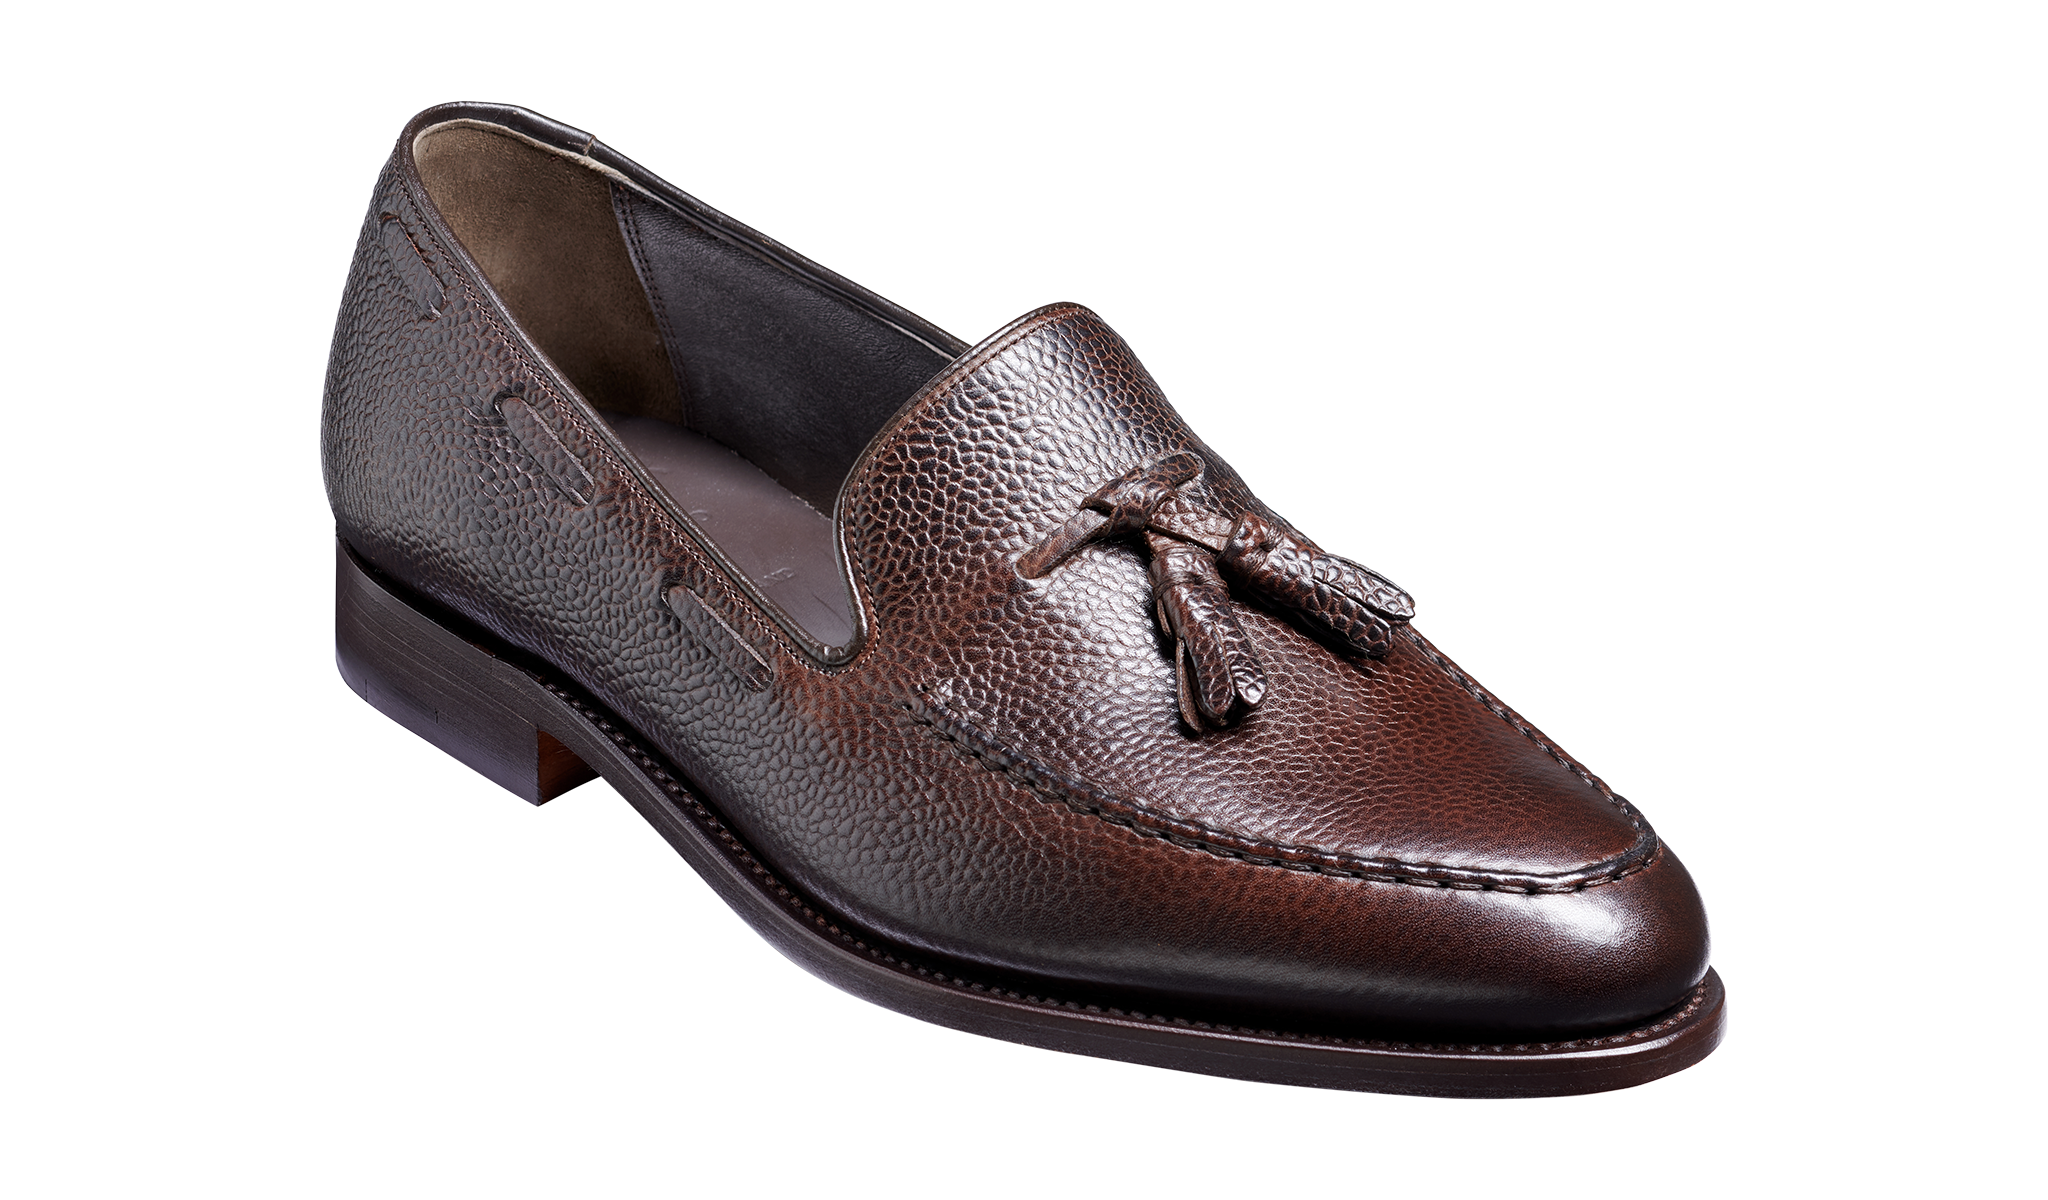 Newborough - Men's Leather Loafer from Barker